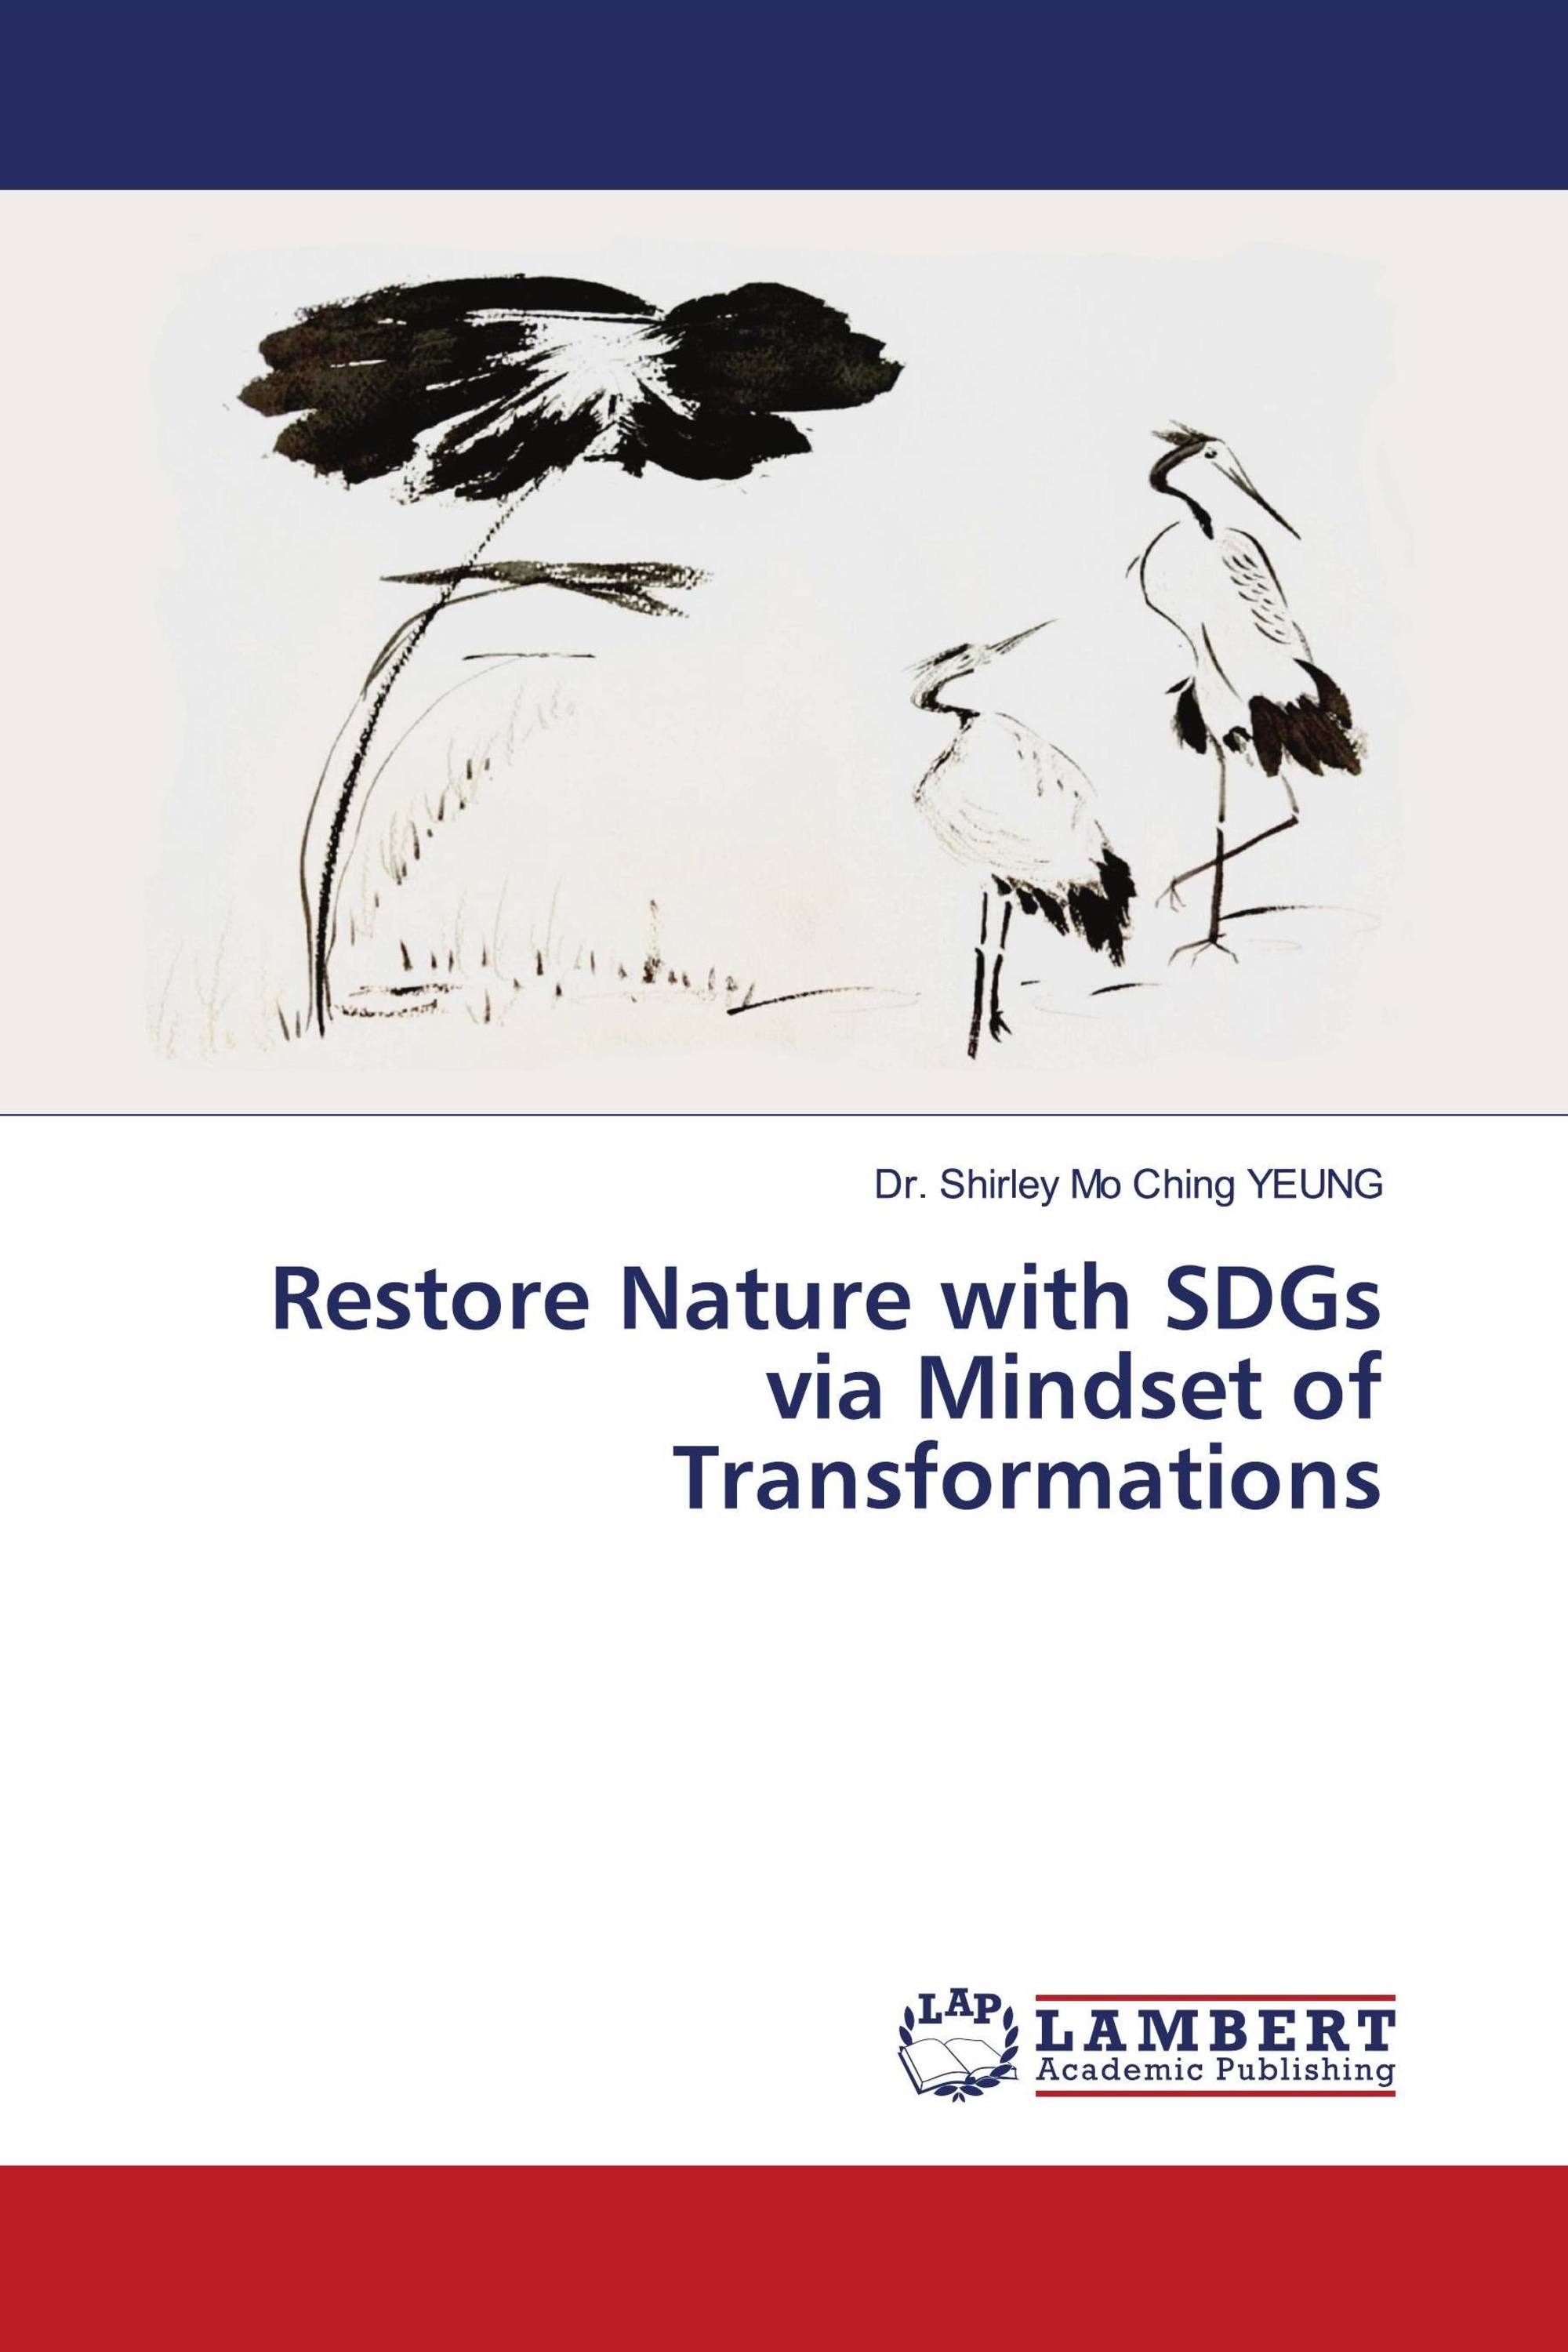 Restore Nature with SDGs via Mindset of Transformations